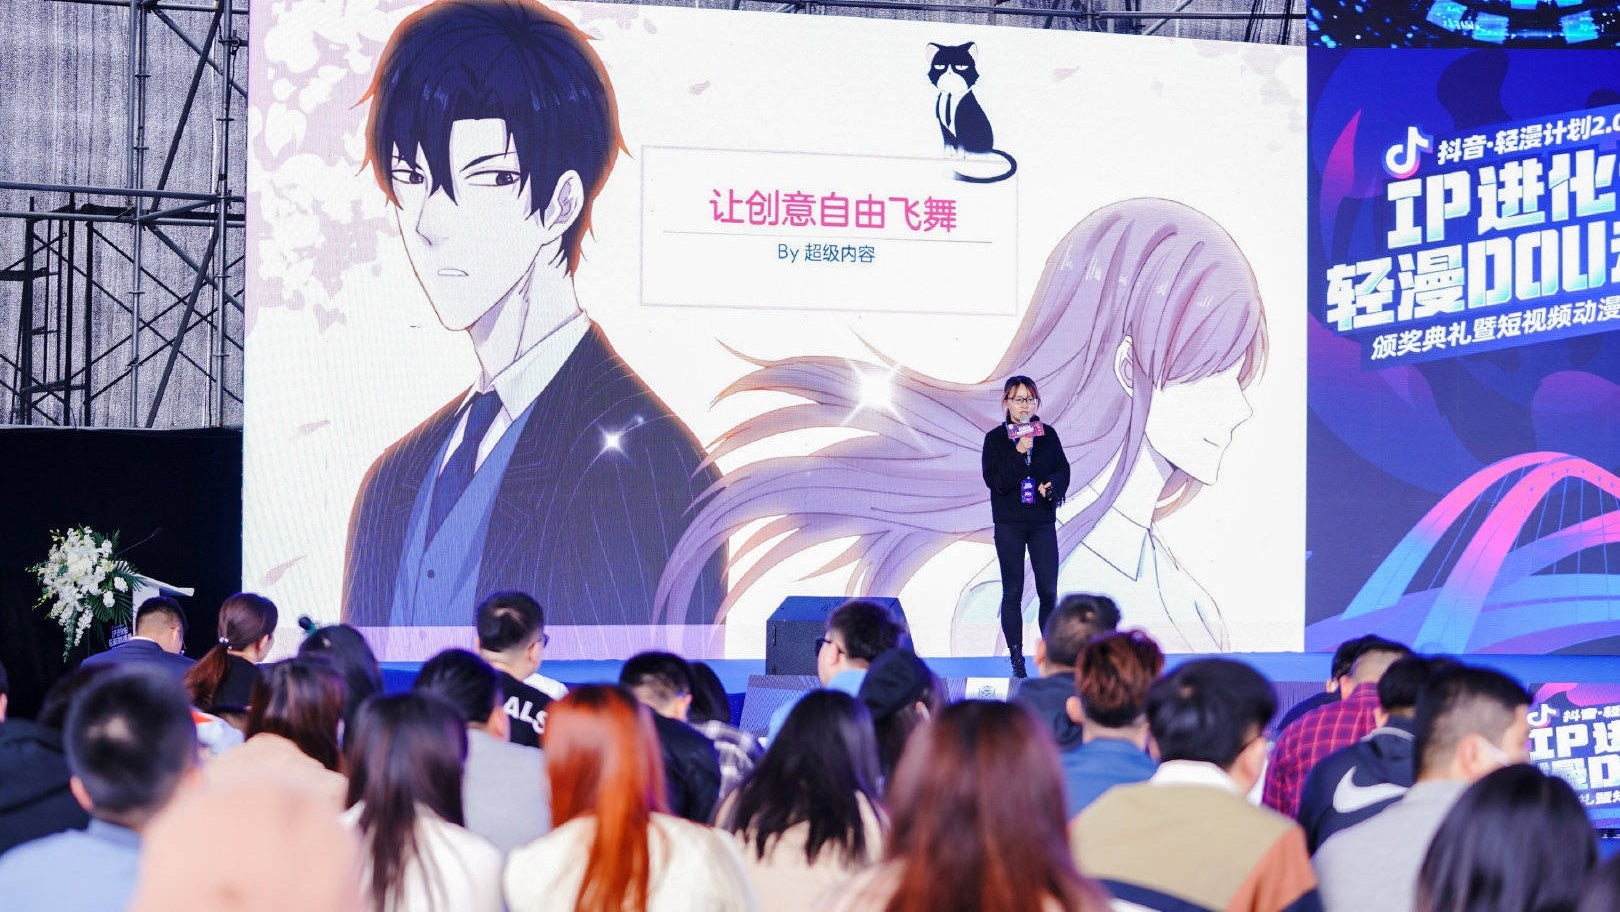 From flagship stores to payment services, Douyin continues to bolster its e-commerce capabilities. But will this be enough to beat out bigger tech foes? Photo: Douyin animators conference in April 2021, Weibo